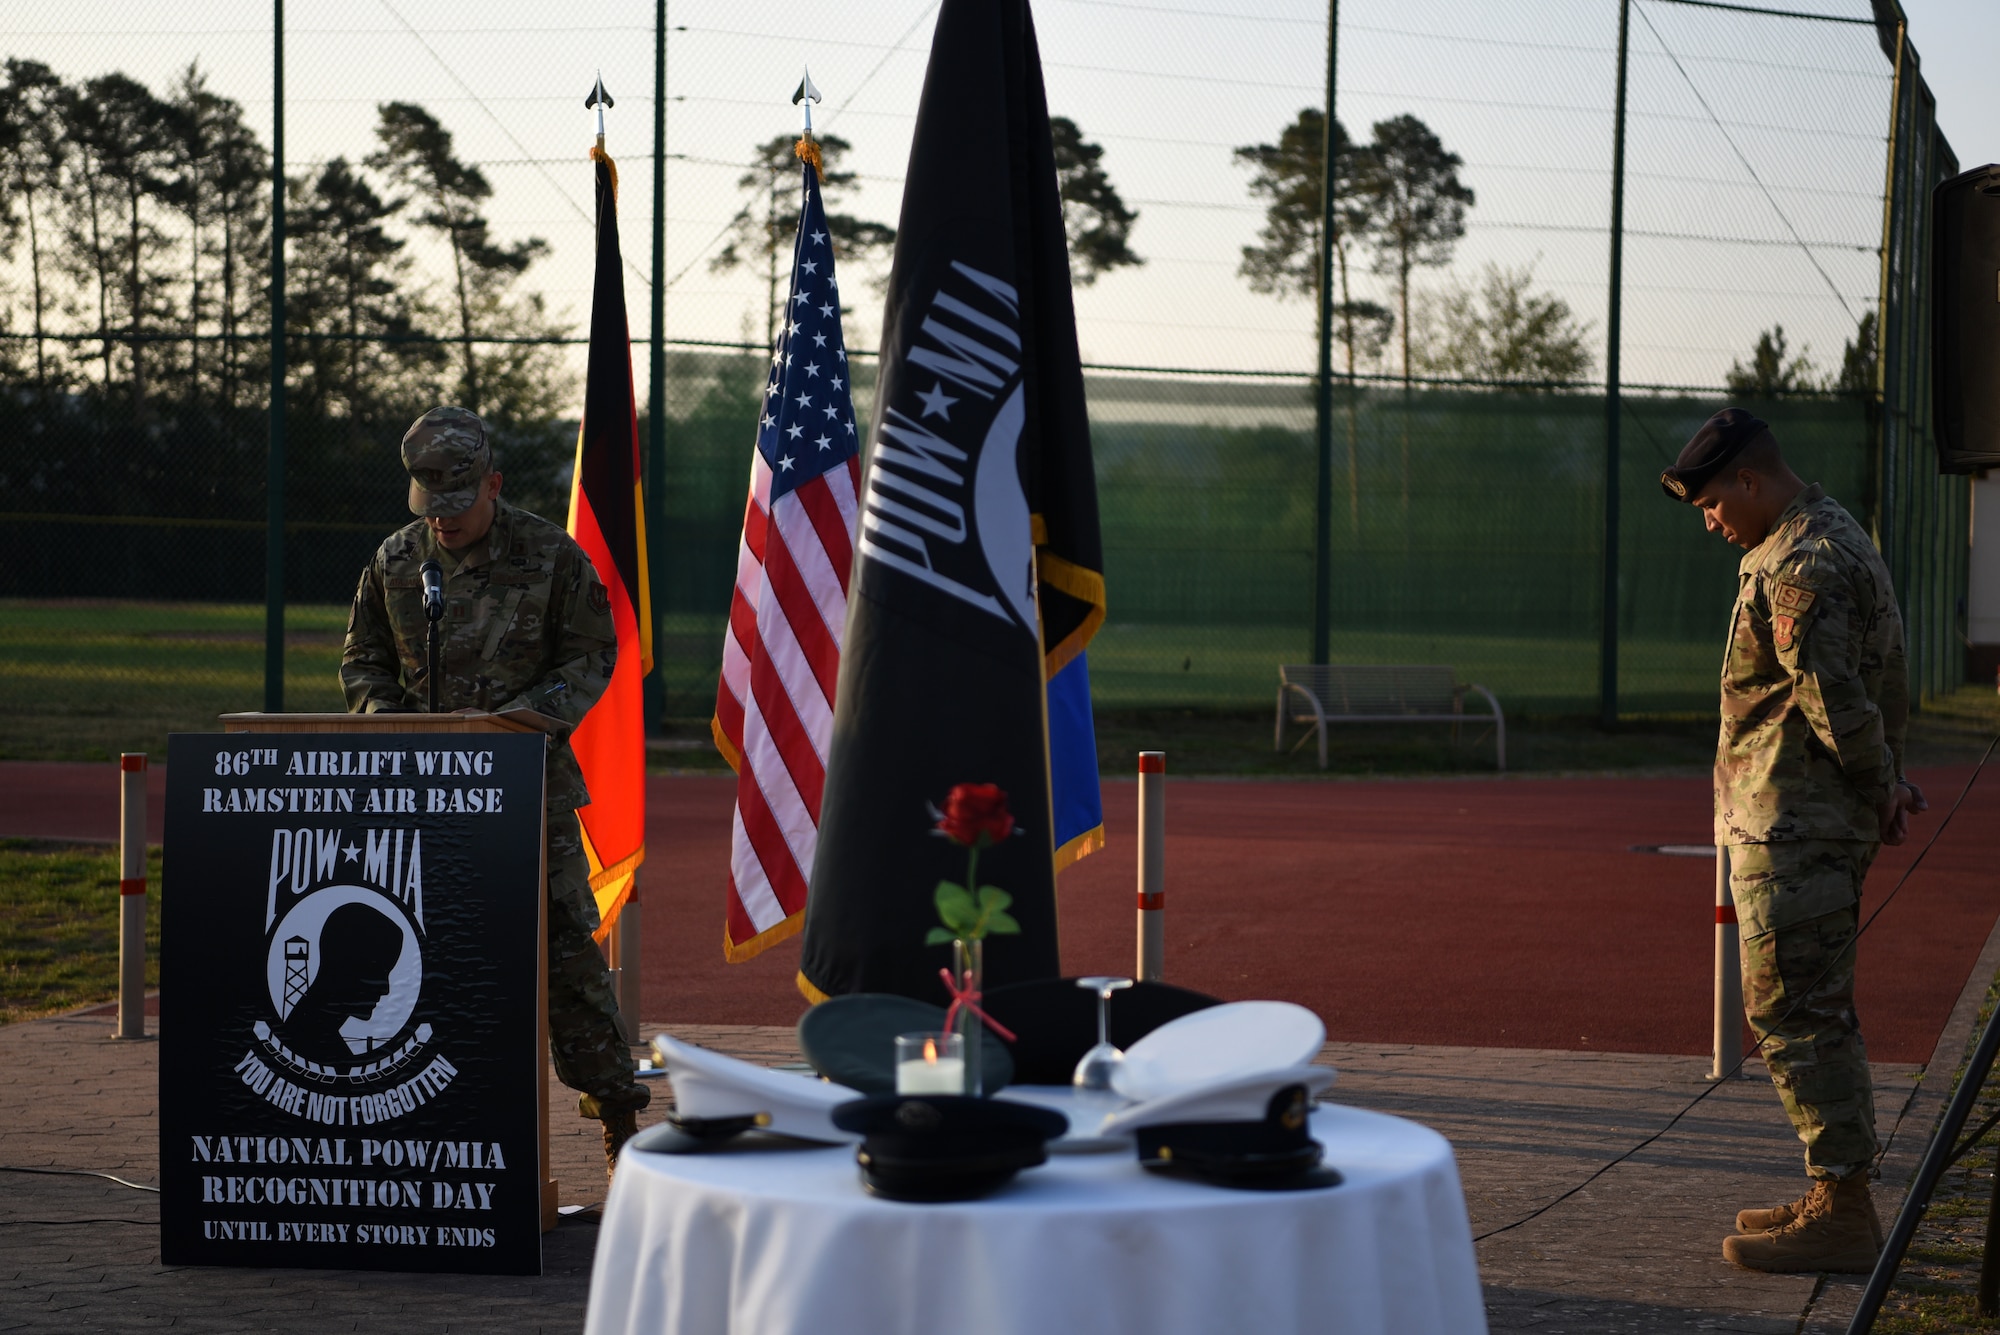 U.S. Air Force Capt. Isandar Atajanow, 86th Airlift Wing chaplain, left, leads the prayer during the National POW/MIA Recognition Day ceremony at Ramstein Air Base, Germany, Sept. 18, 2020.